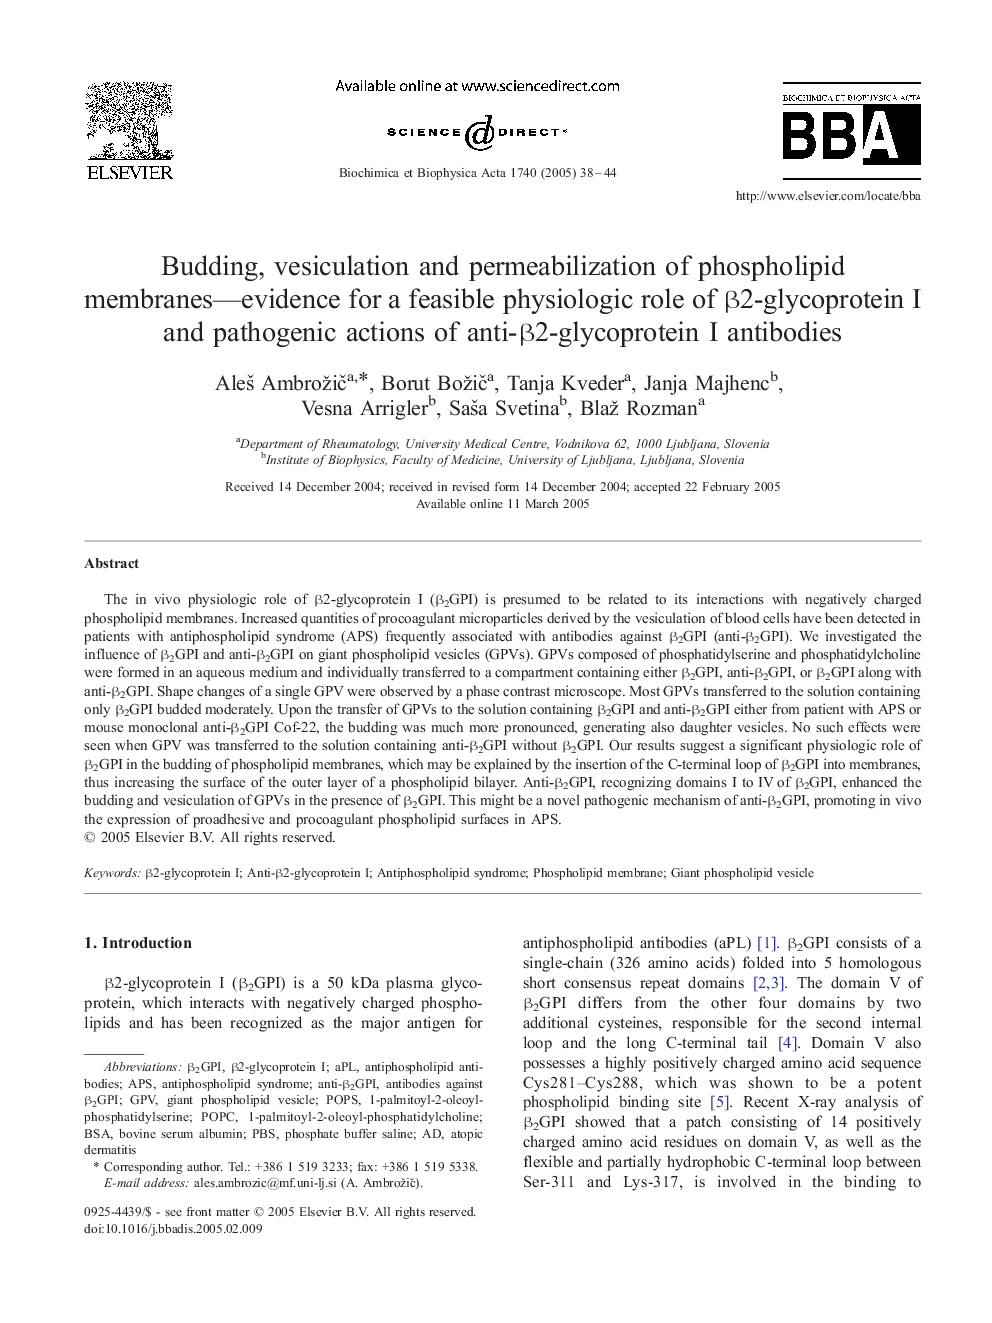 Budding, vesiculation and permeabilization of phospholipid membranes-evidence for a feasible physiologic role of Î²2-glycoprotein I and pathogenic actions of anti-Î²2-glycoprotein I antibodies